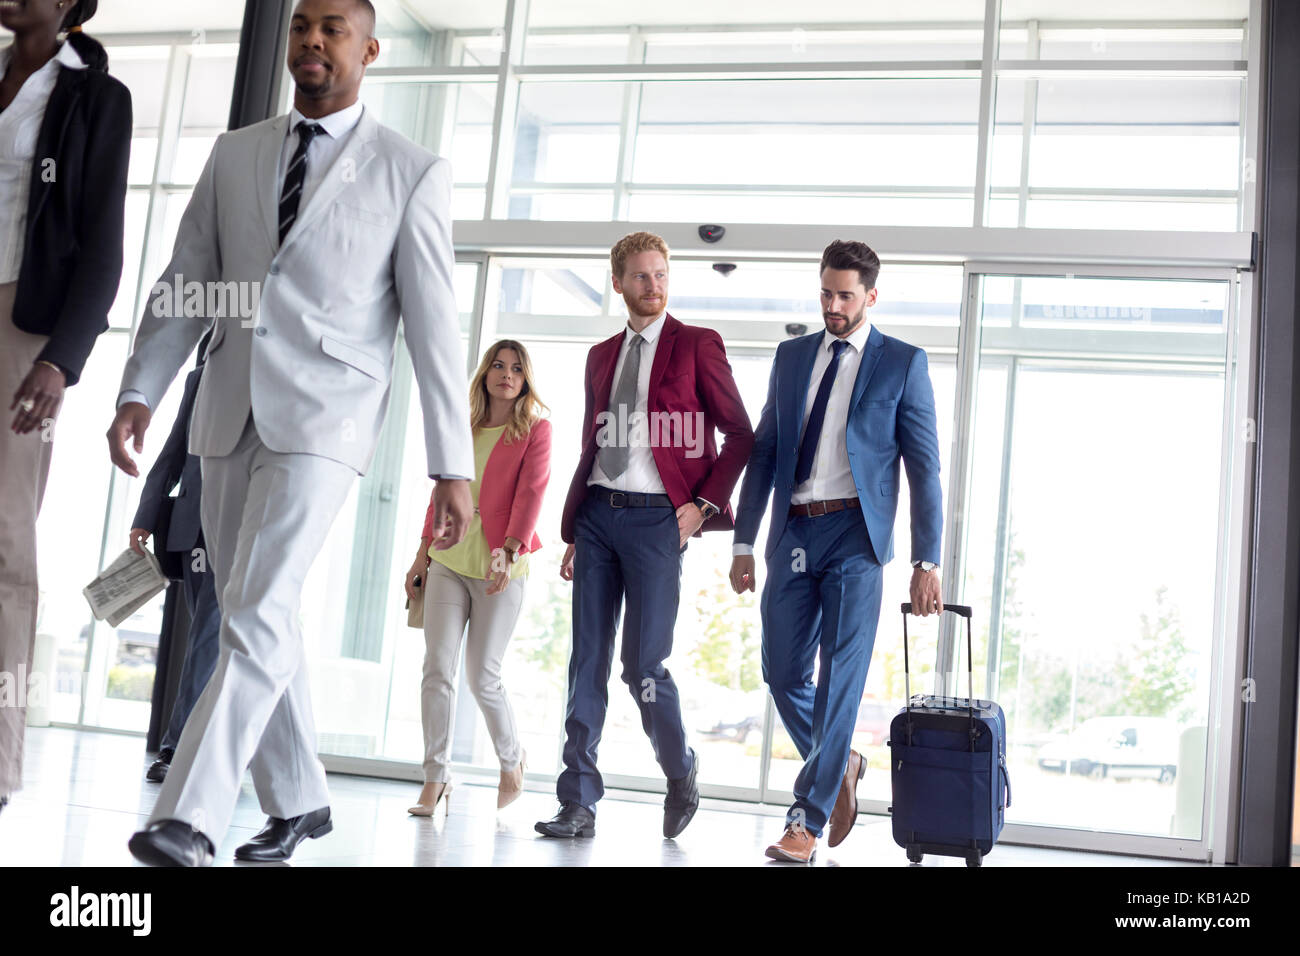 Young multiethnic international tourists arrive in airport waiting room Stock Photo